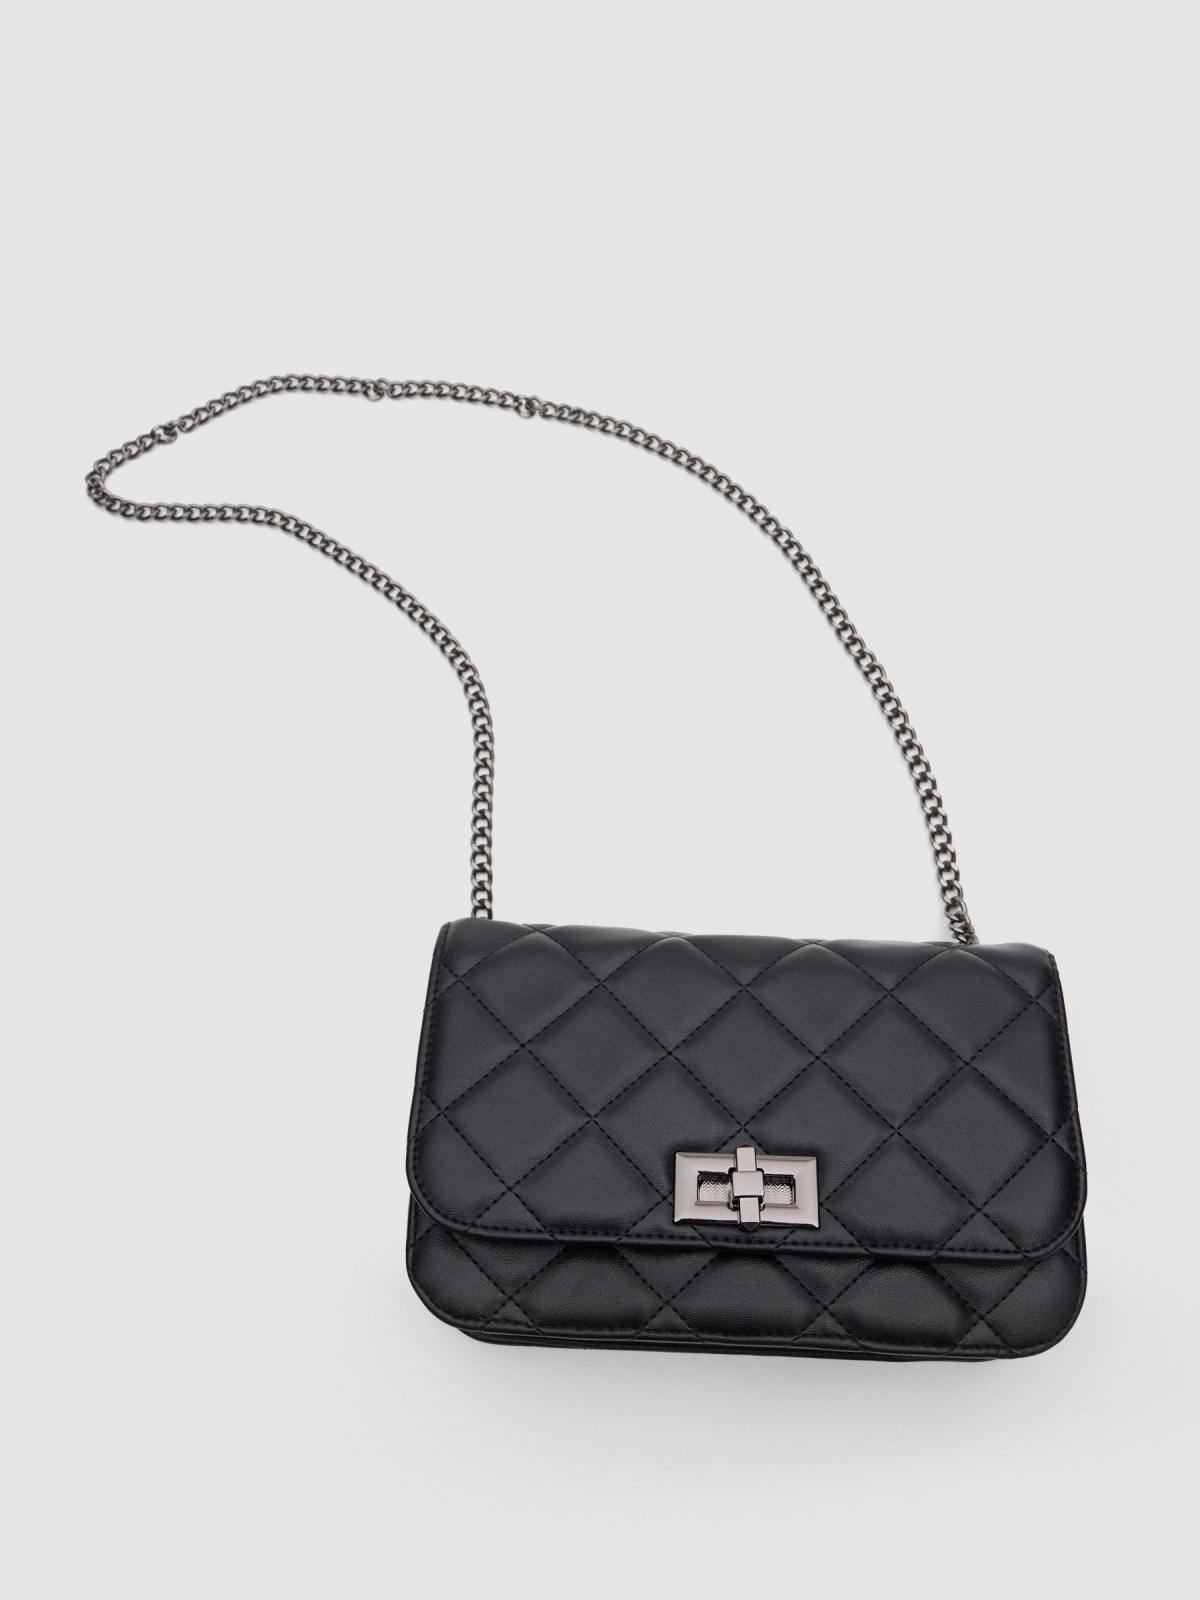 Quilted patent leather bag black detail view